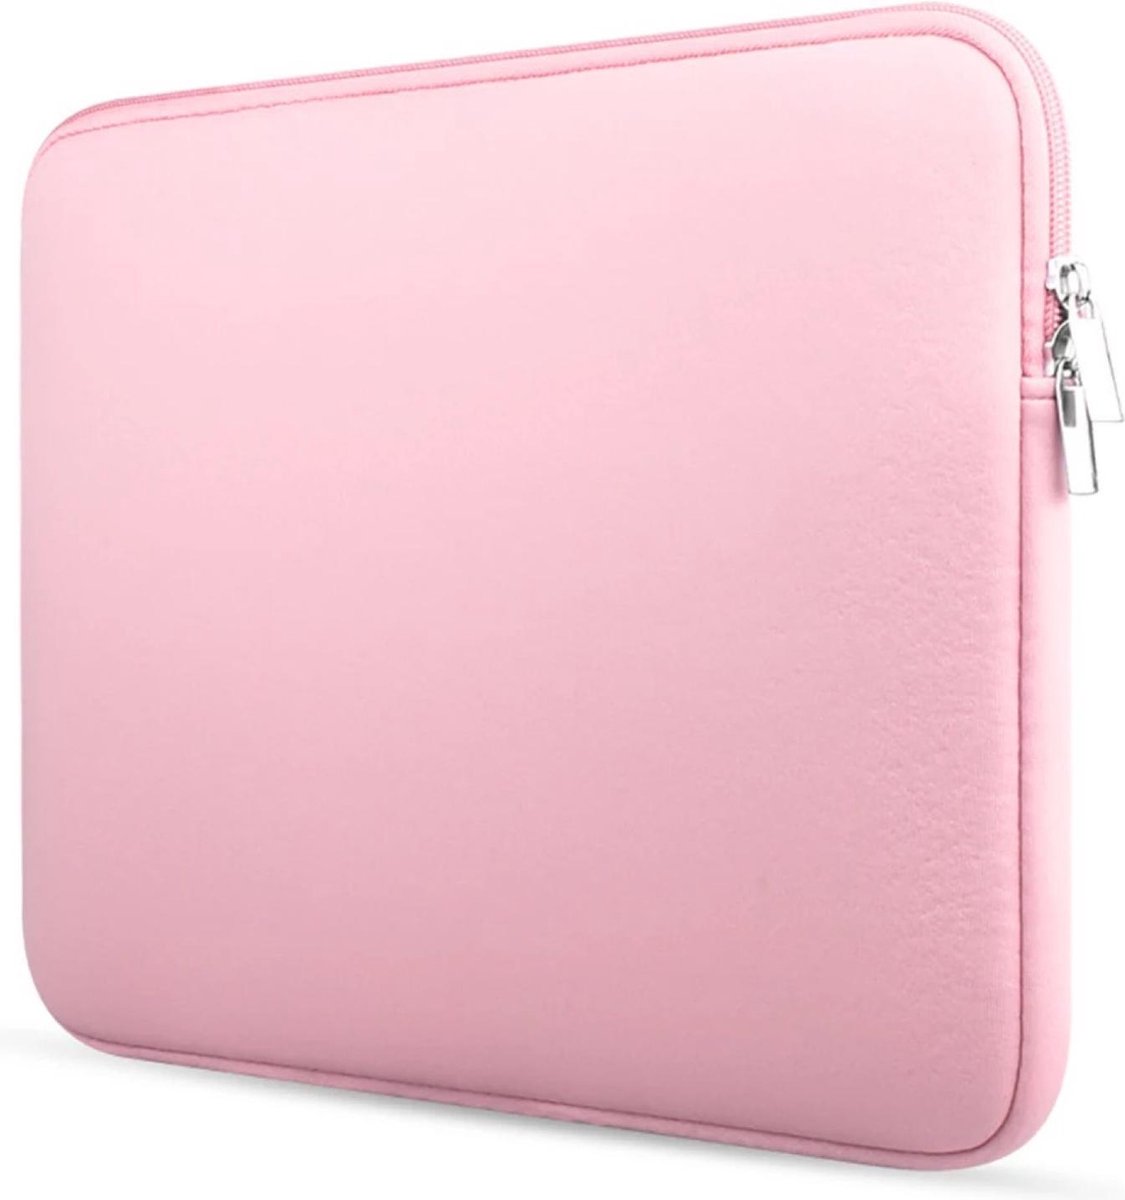 Laptop sleeve voor Acer Travelmate - Dubbele Ritssluiting - Soft Touch - hoes - extra bescherming - spatwaterbestendig - 13 inch ( pink )